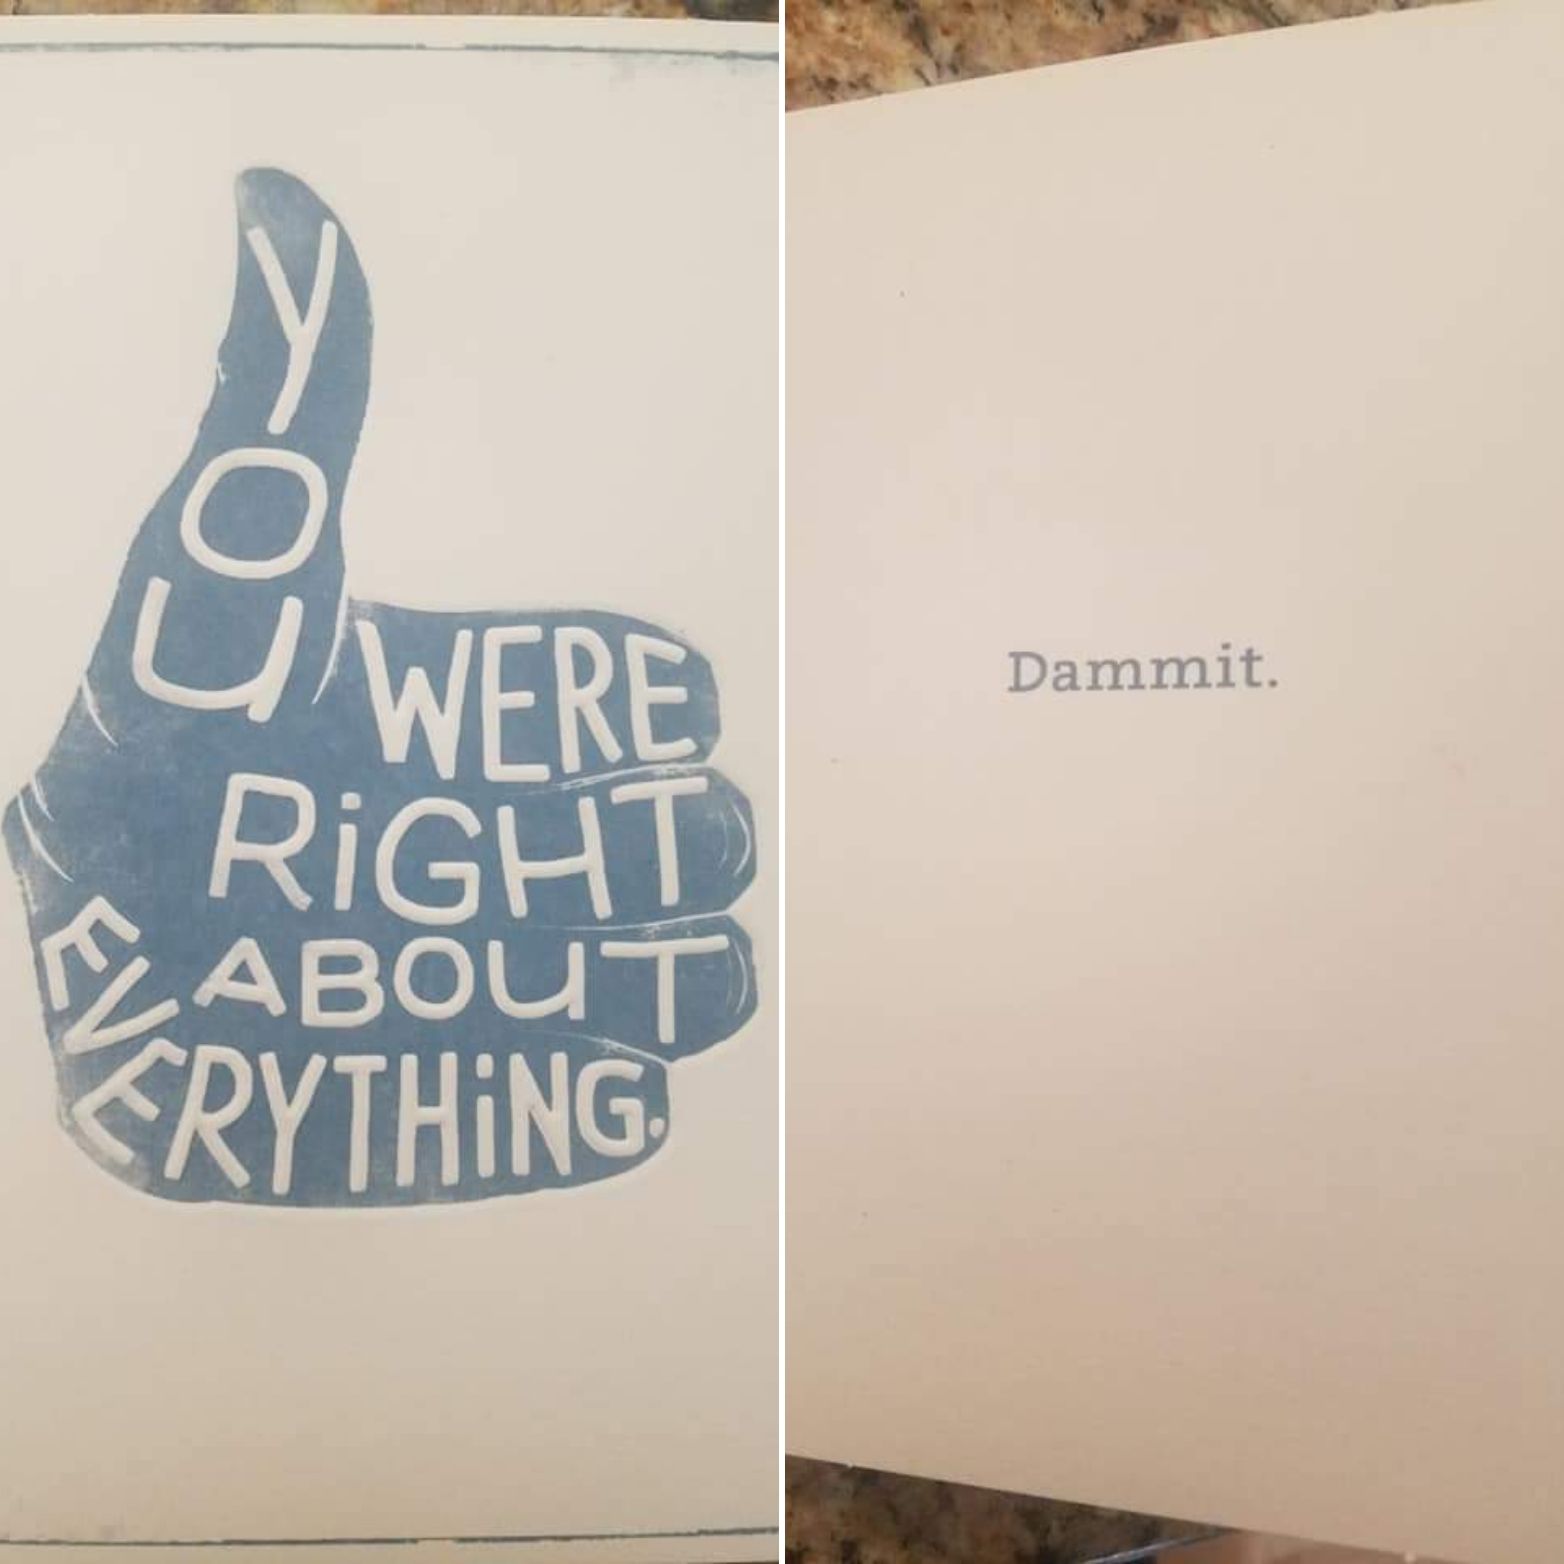 The Father's day card my dad has been awaiting for over forty years.